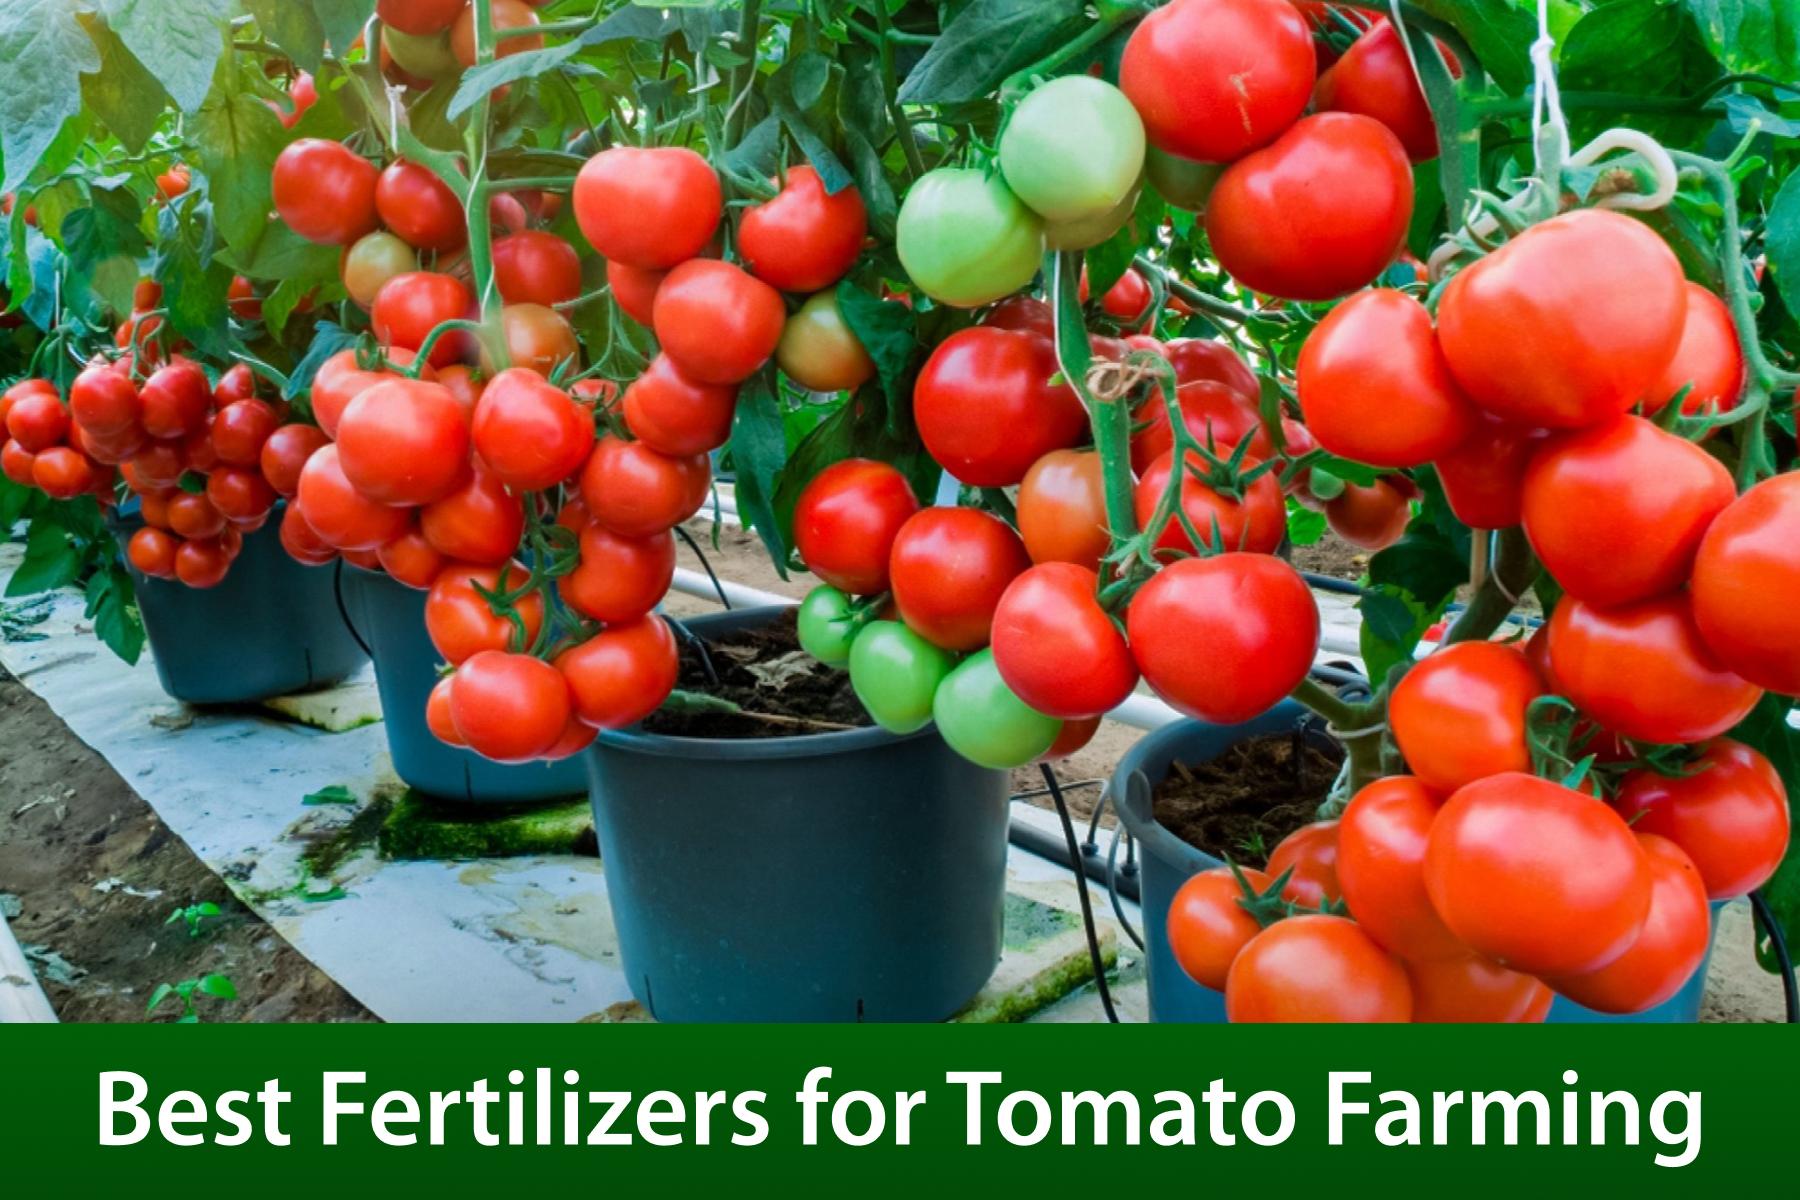 Boost Your Tomato Farming in Nigeria with These Proven, Potent Fertilizers